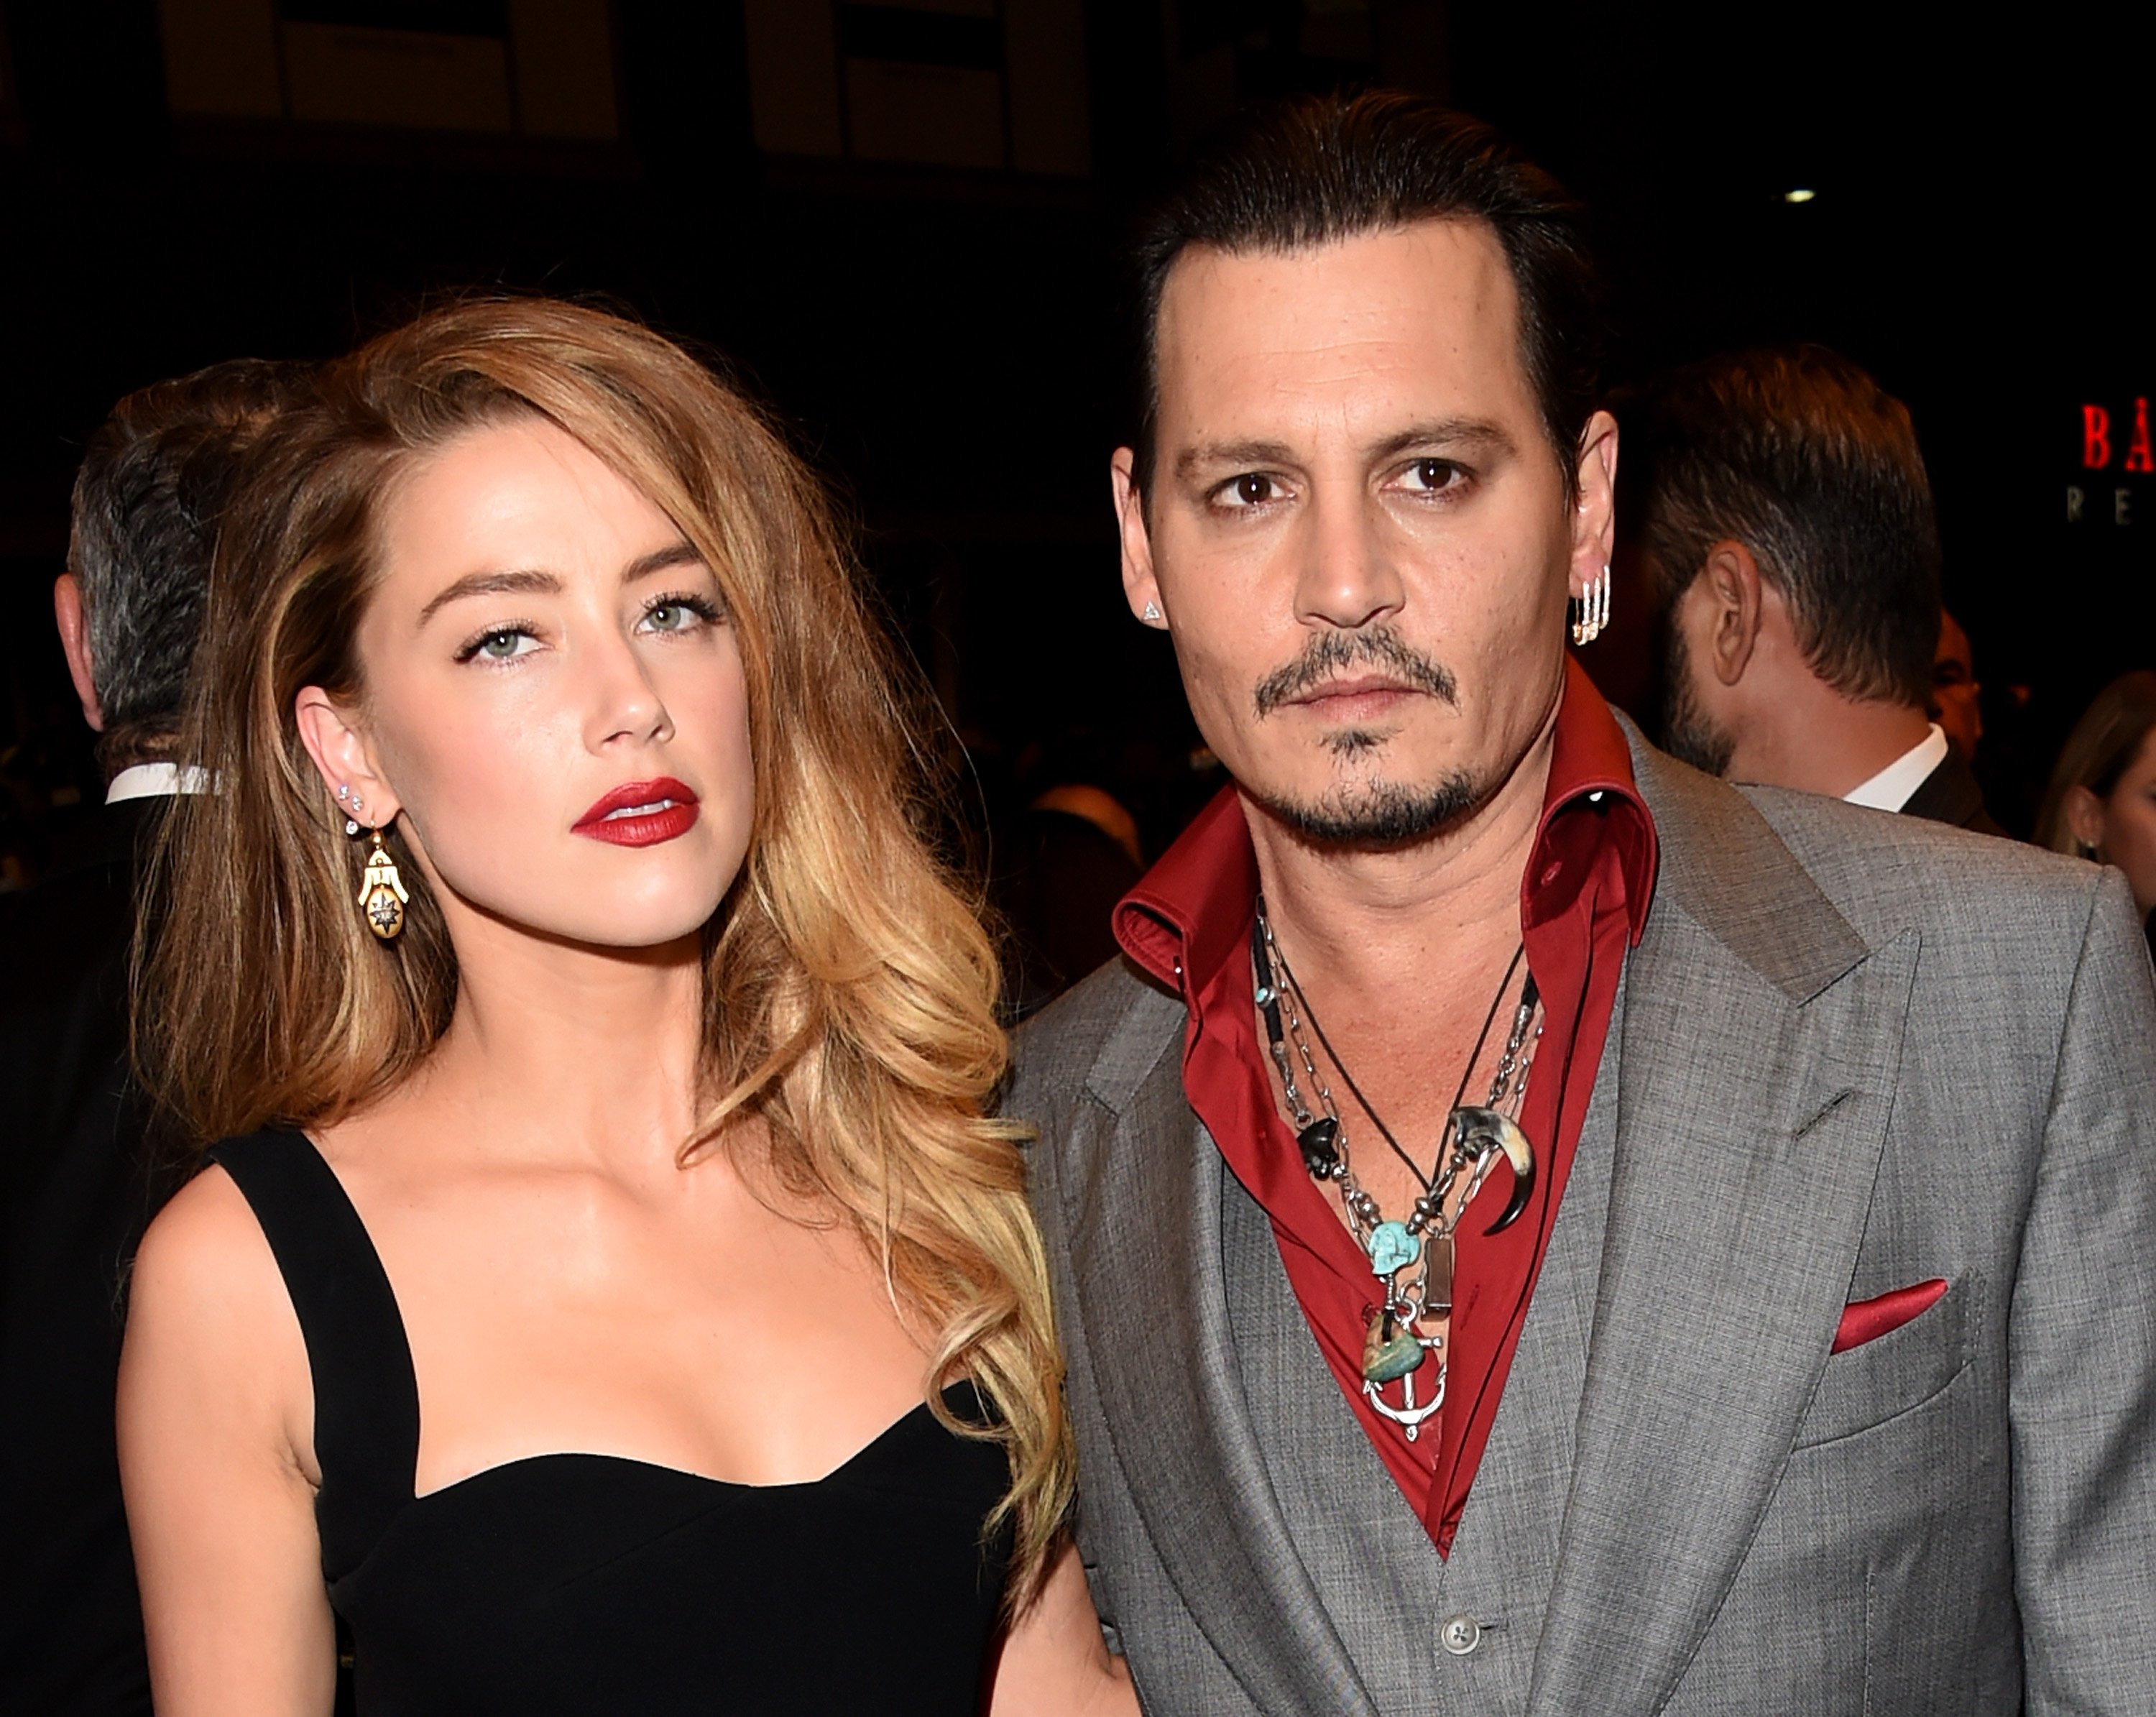 Johnny Depp and Amber Heard attend the "Black Mass" premiere during the 2015 Toronto International Film Festival at The Elgin on September 14, 2015, in Toronto, Canada. | Source: Getty Images